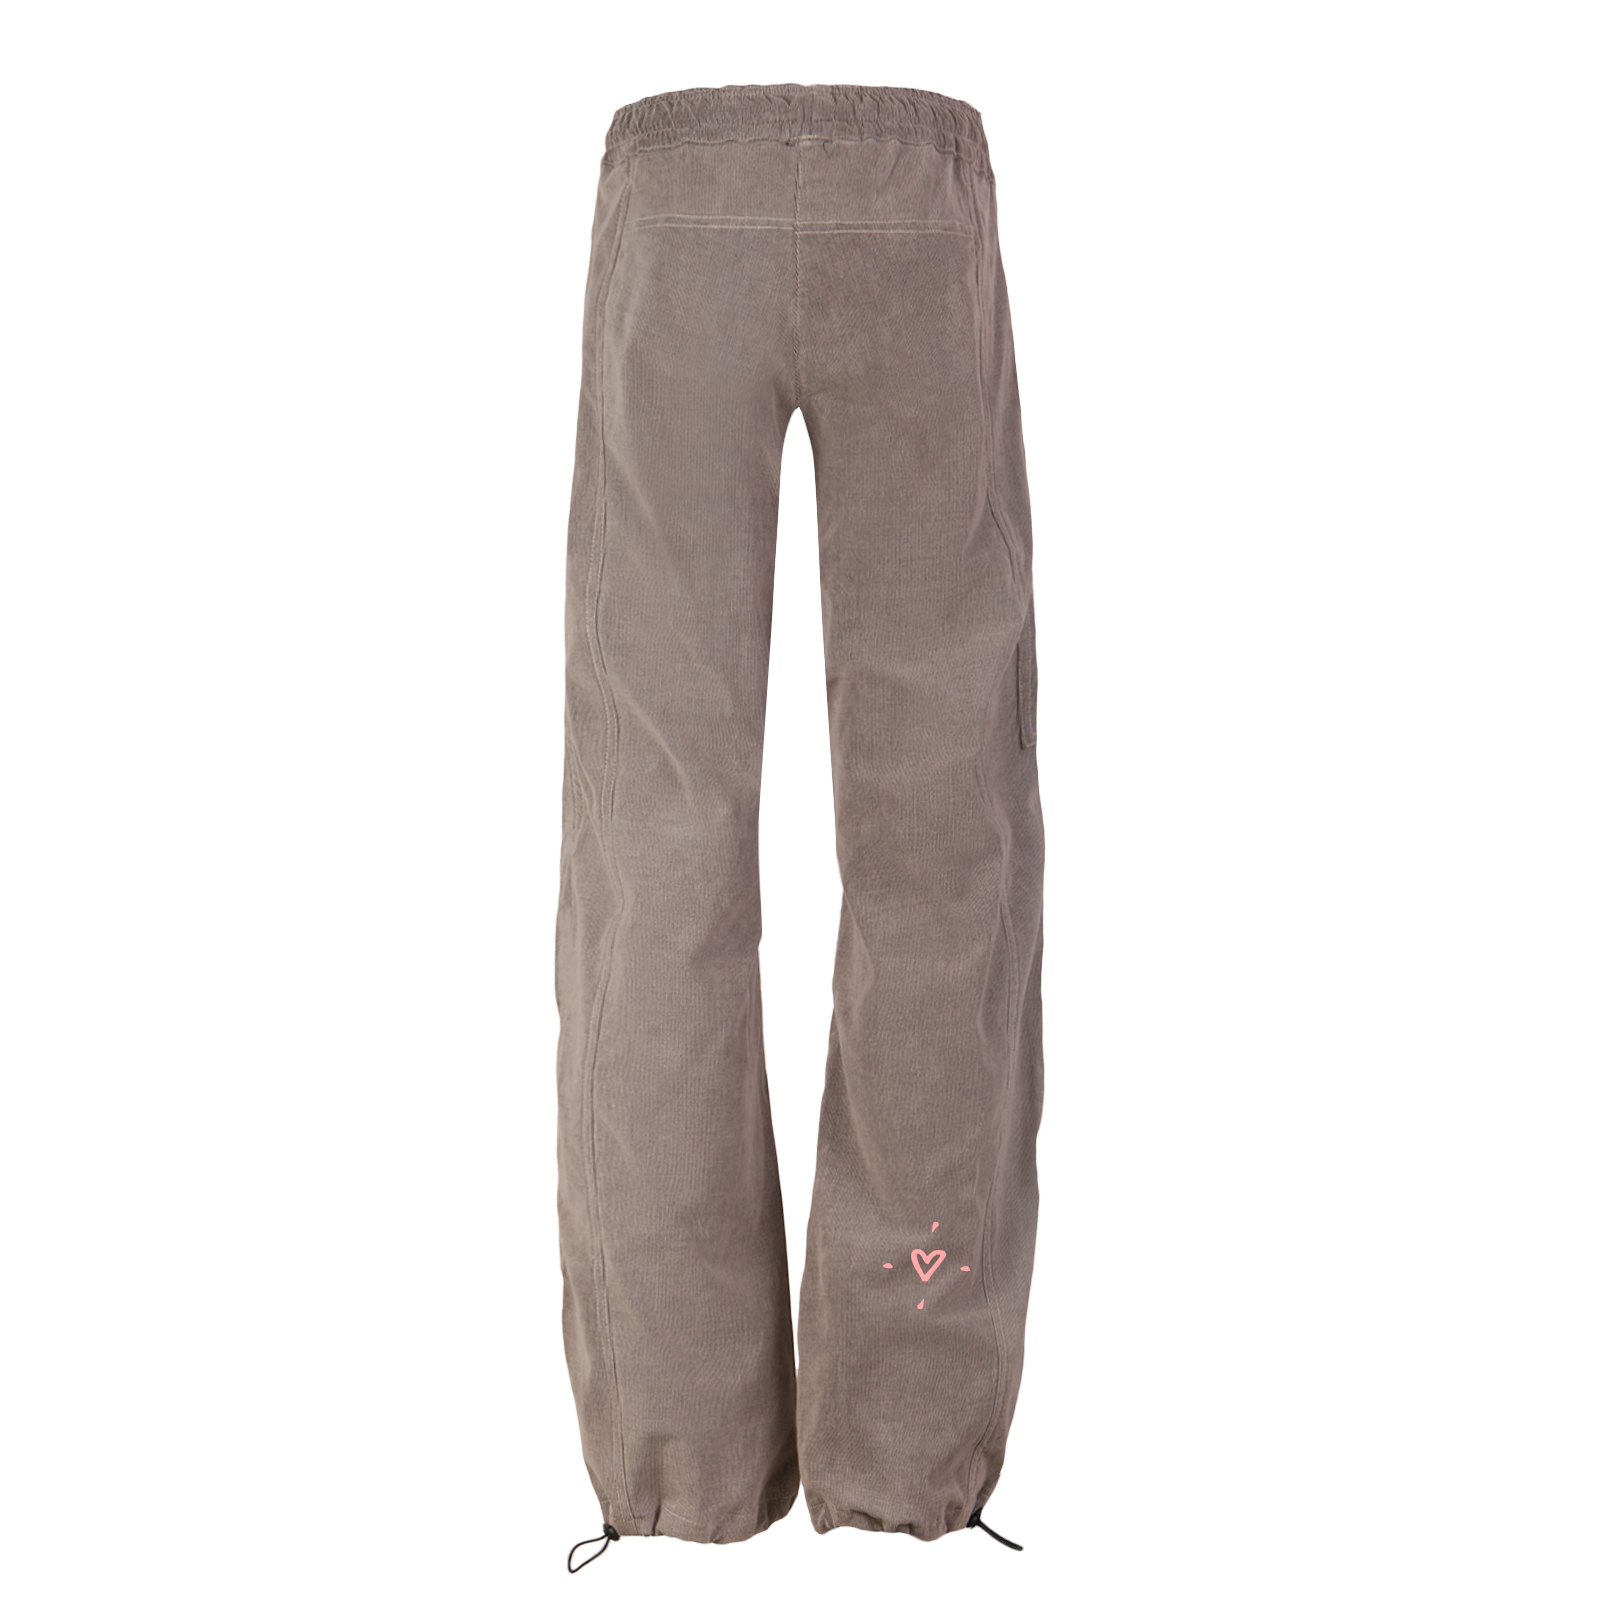 Women's Climbing trousers in soft stretch corduroy pink VIOLET VELVET Monvic for sports